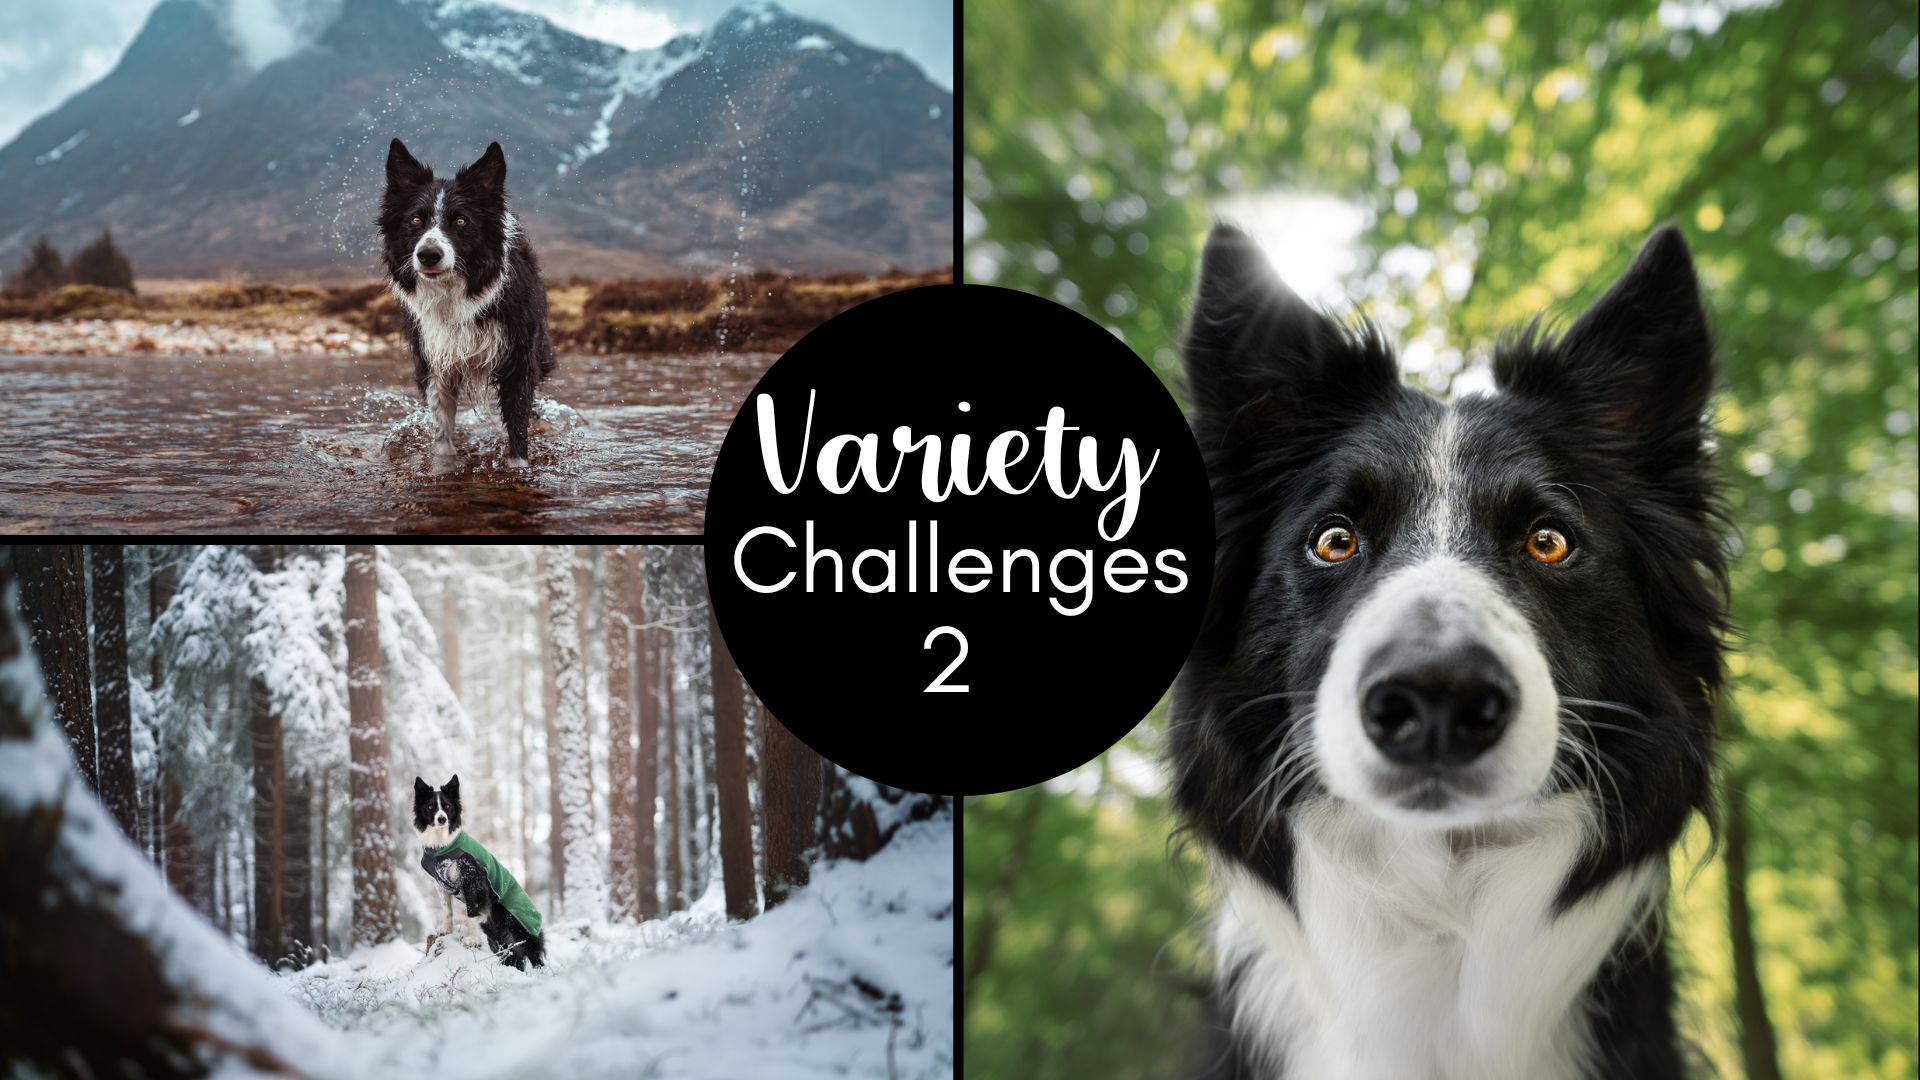 Variety Challenges: All about the dog